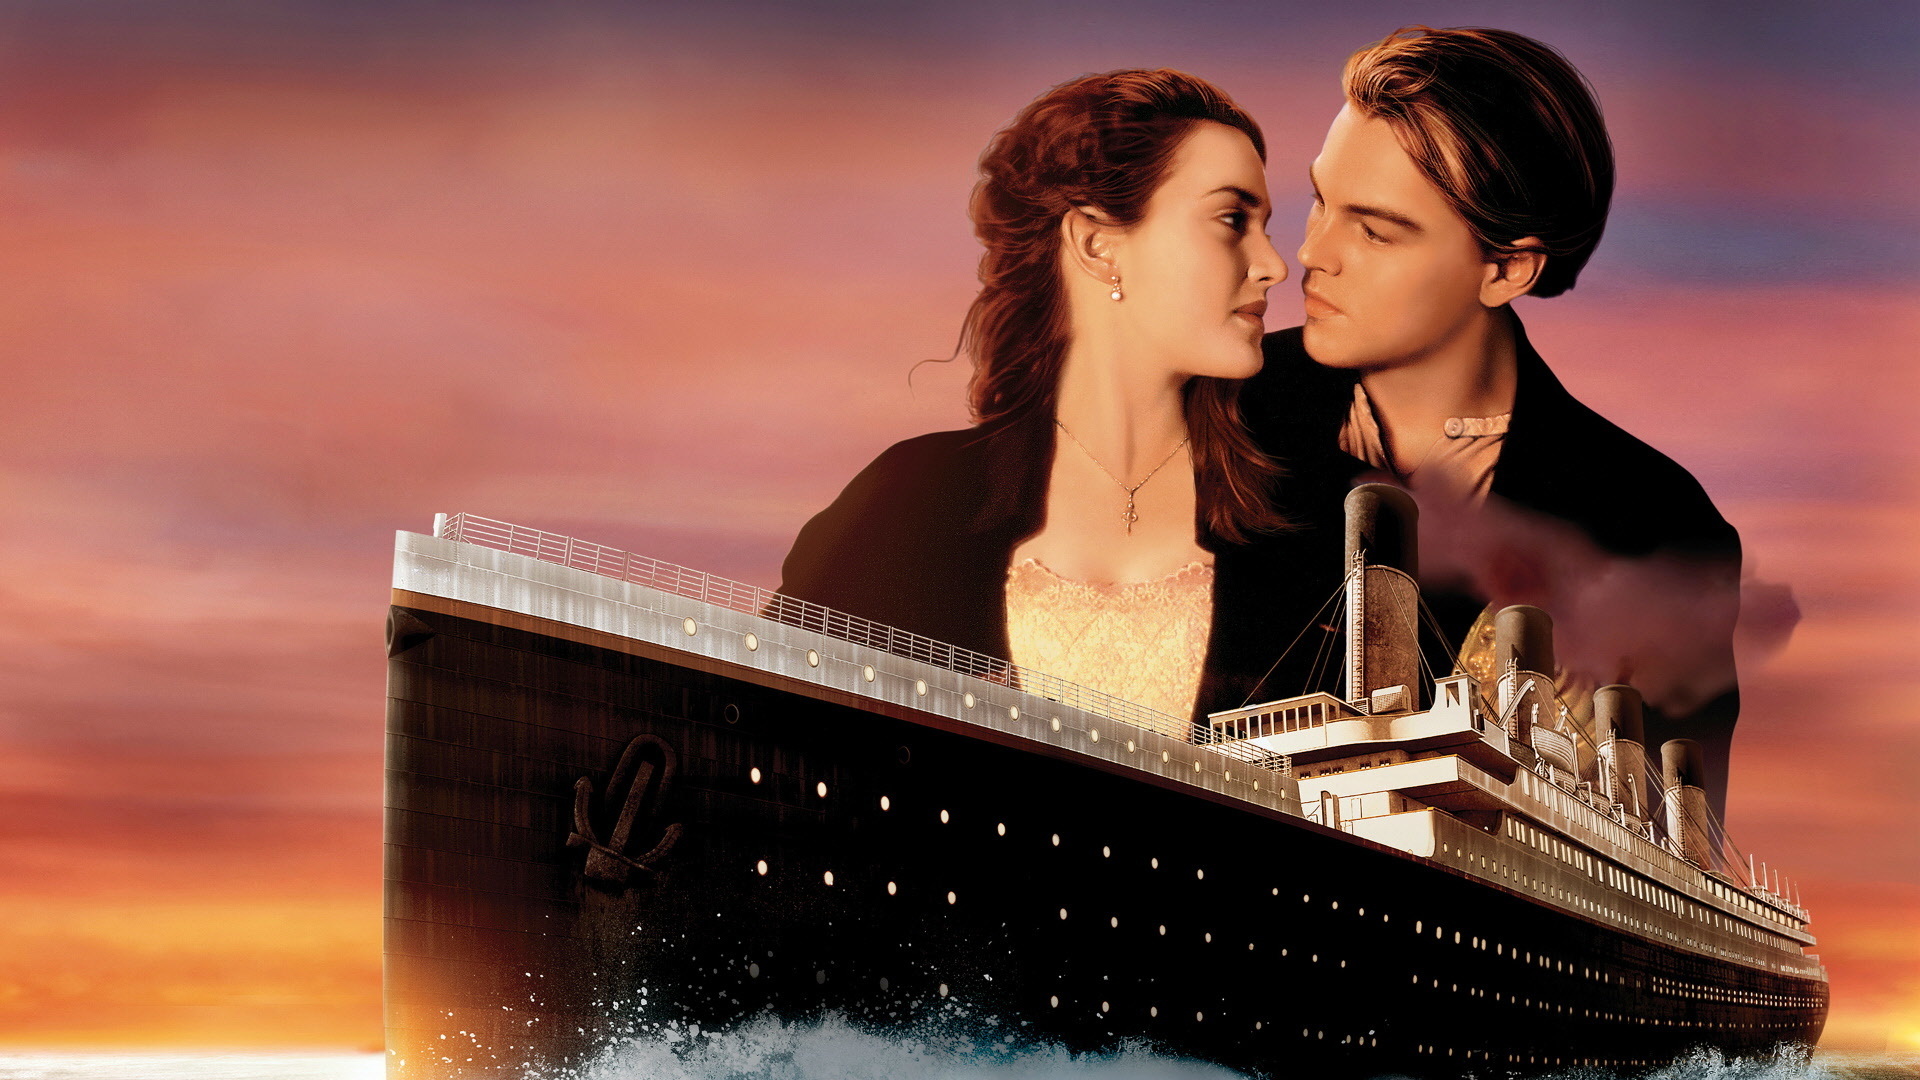 titanic theme song download